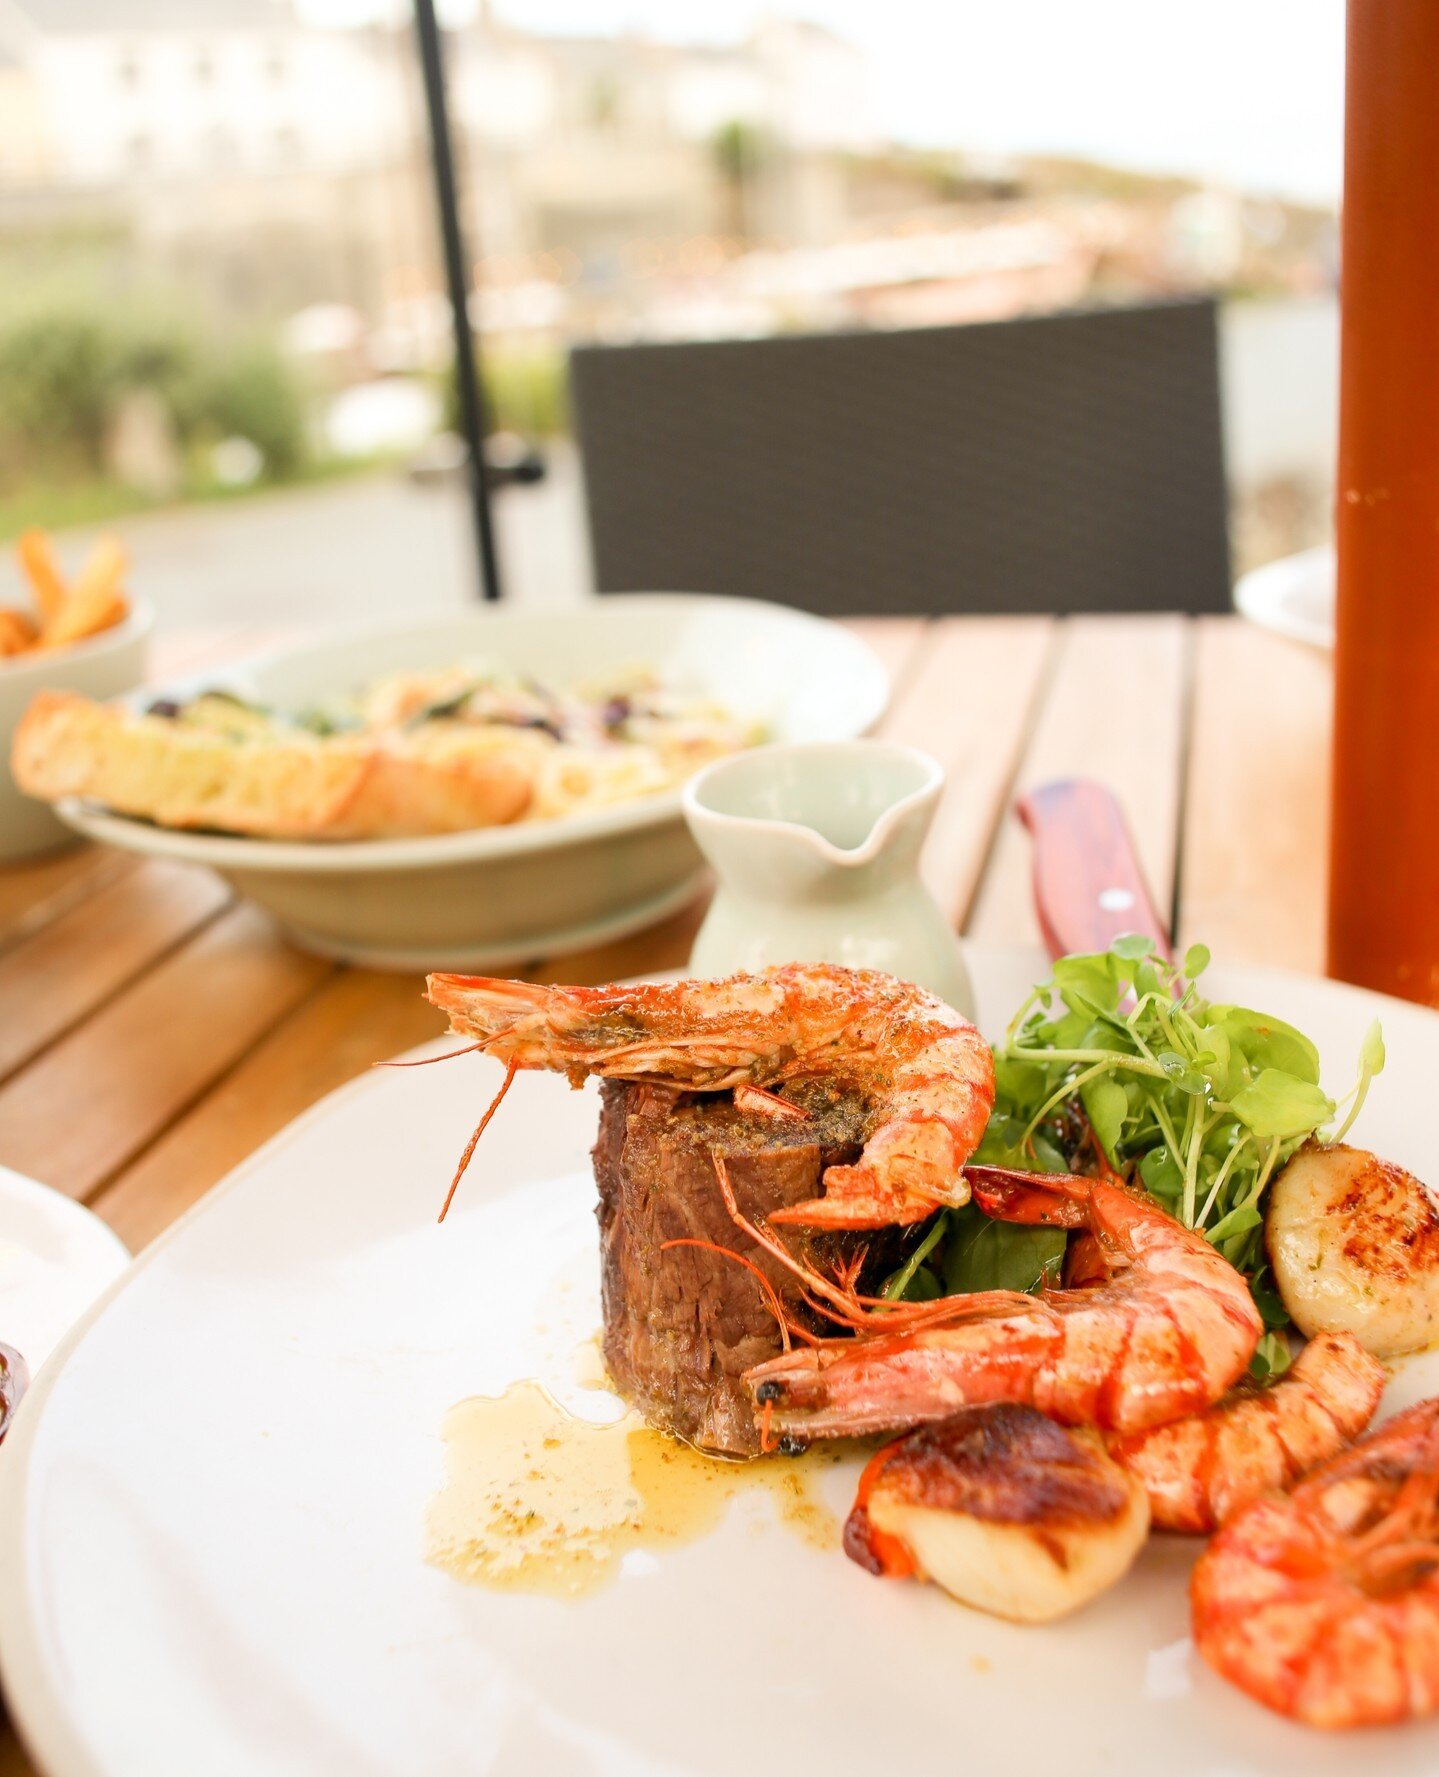 Surfin' and Turfin' on the terrace🐟🥩. 12-hour blade of Cornish beef, garlic and parsley tiger prawns with scallops. Got you hungry?🤤 ⁠
⁠
#steak #meat #seafood #cornwall #meatlover #grill #bbq #lovecornwall #cornishcoast #kernow